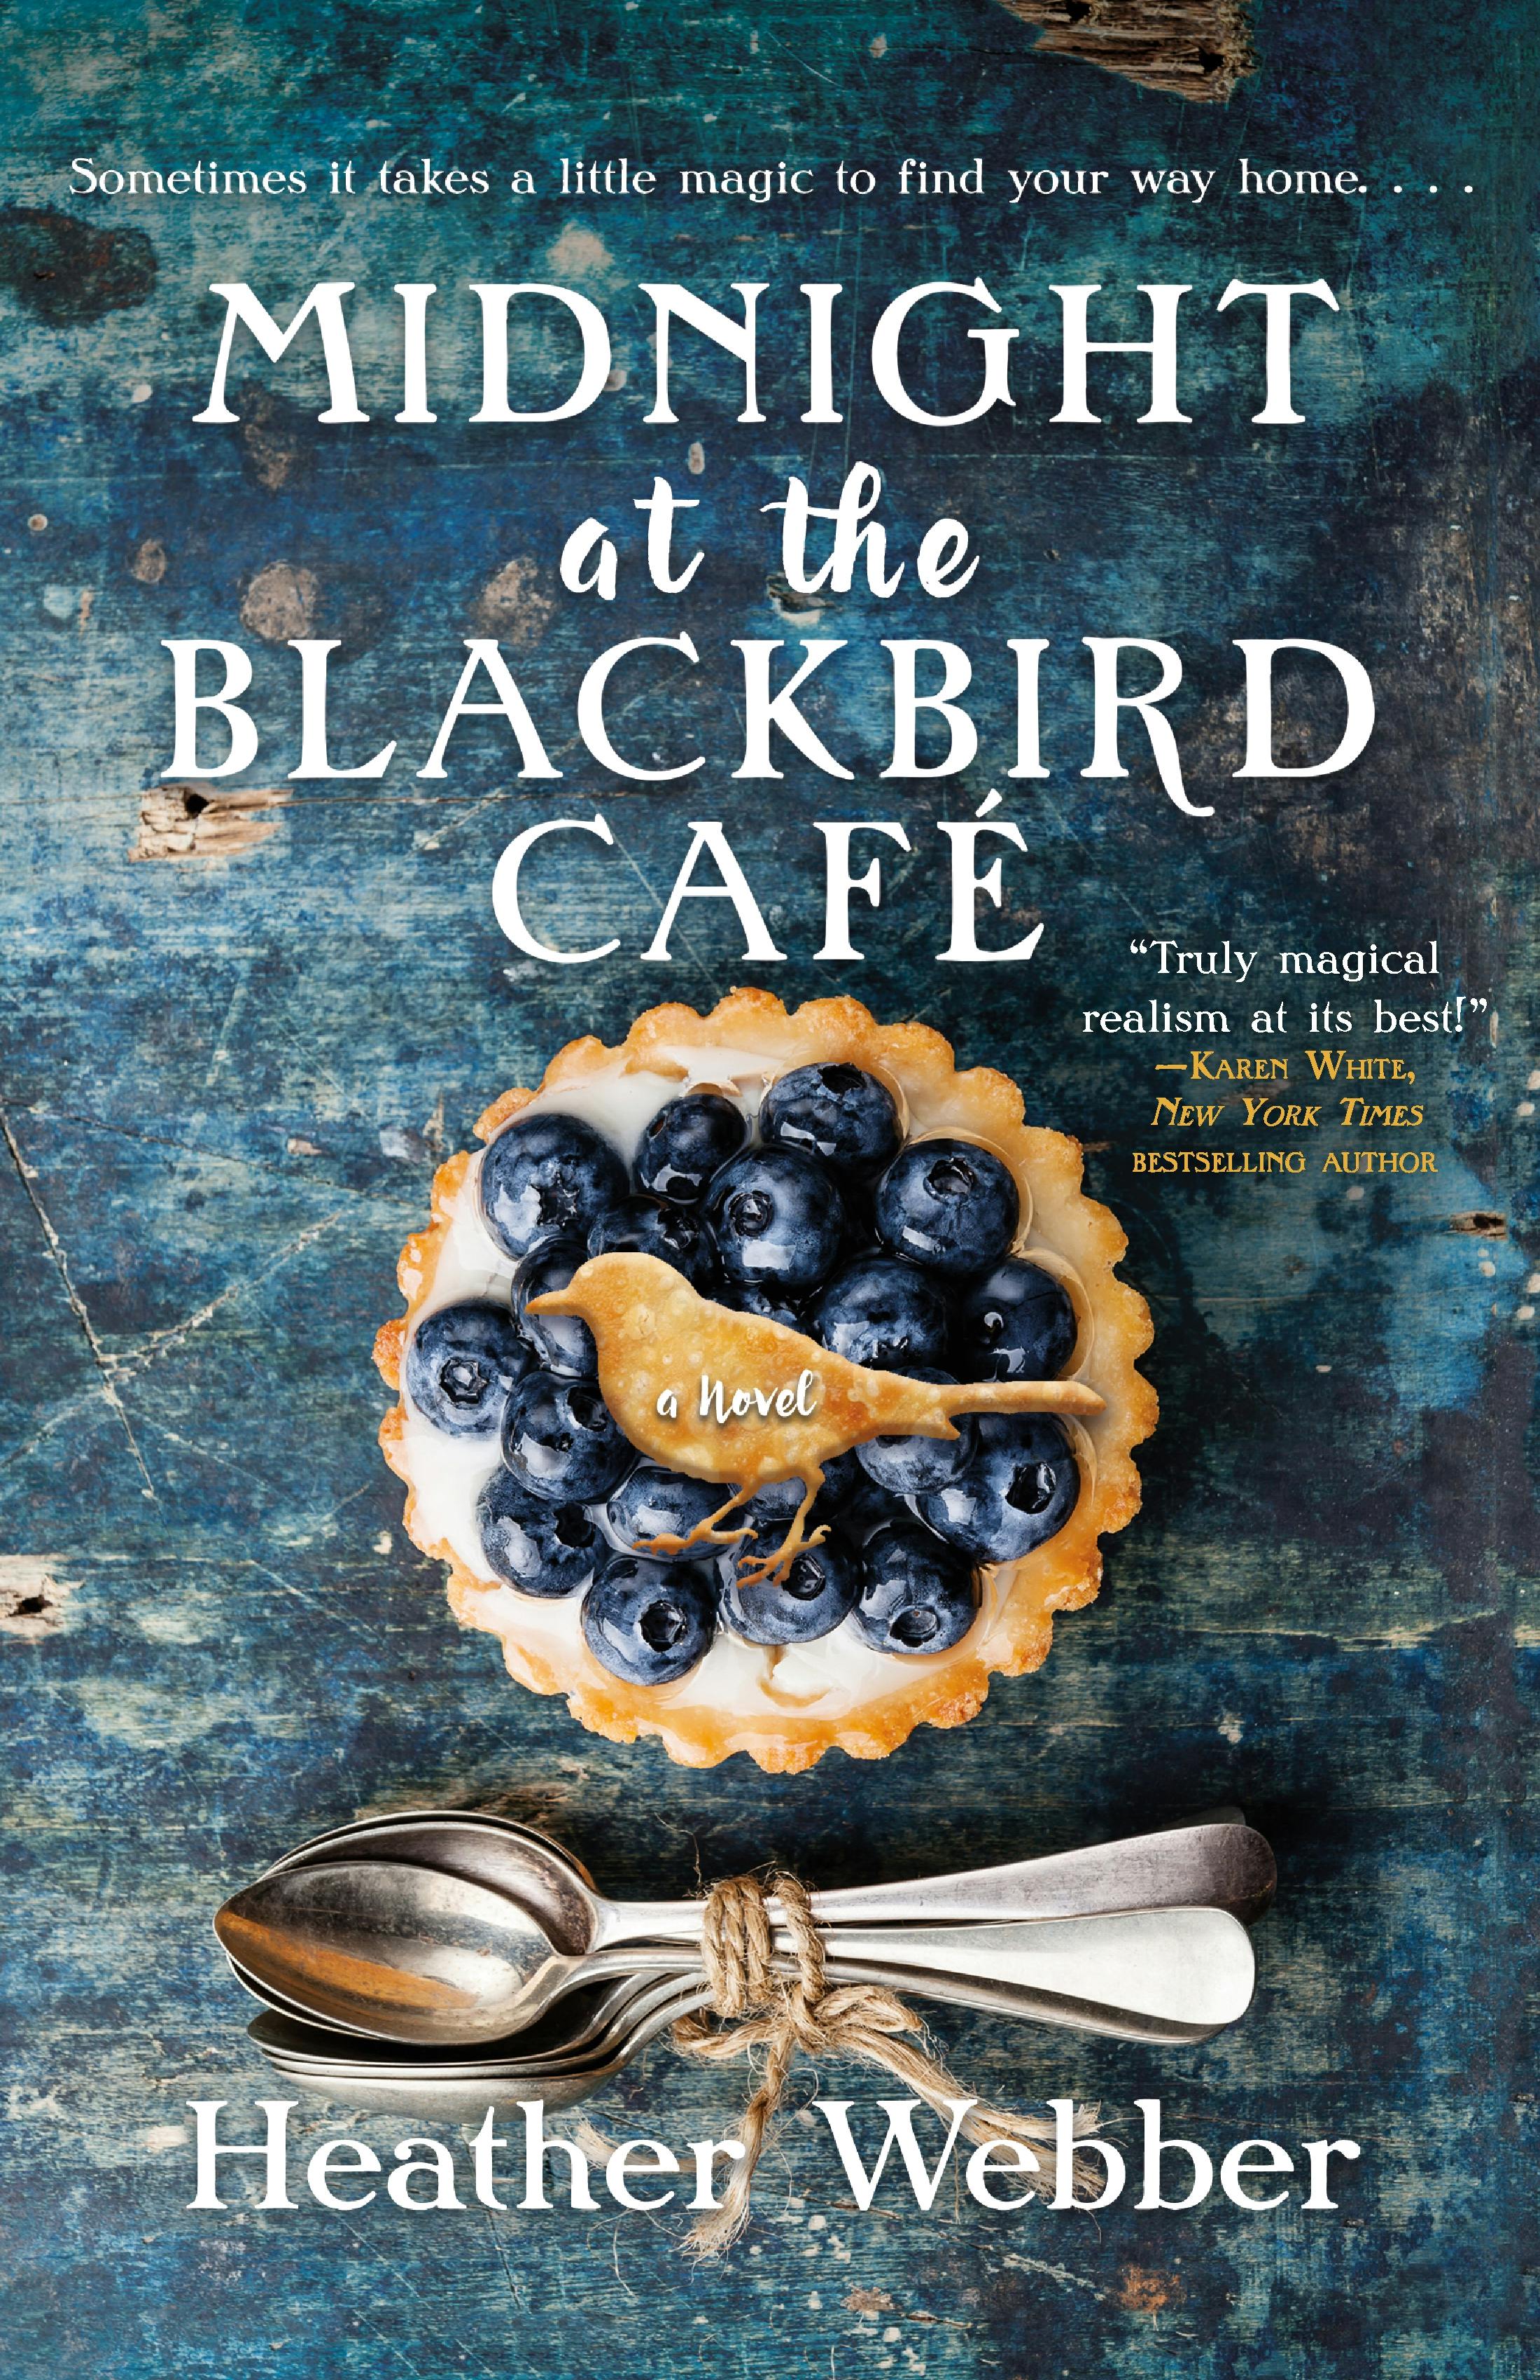 Cover for the book titled as: Midnight at the Blackbird Cafe